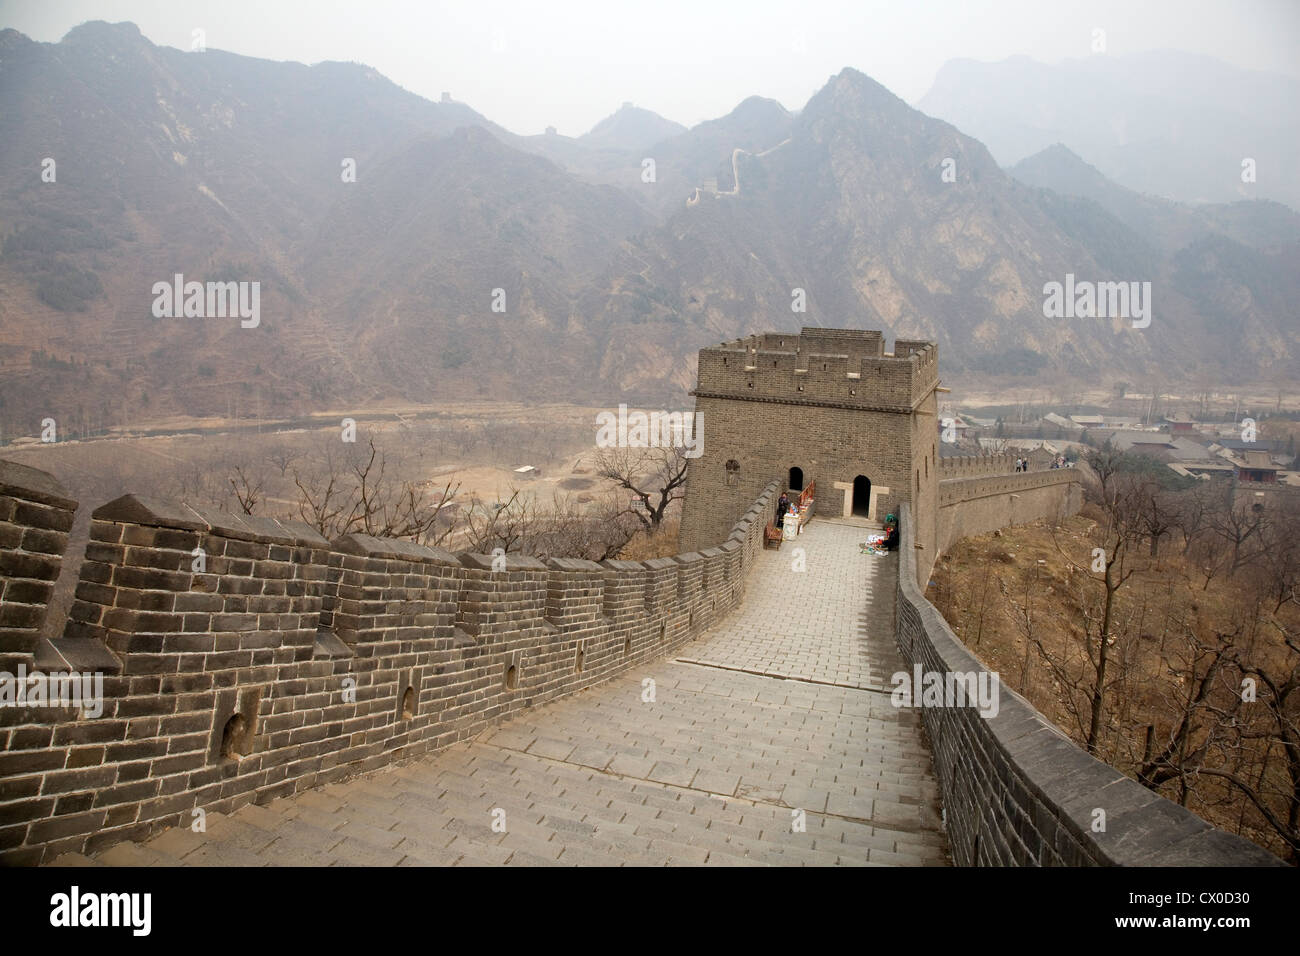 Views of the mountains from the Great Wall of China. Stock Photo